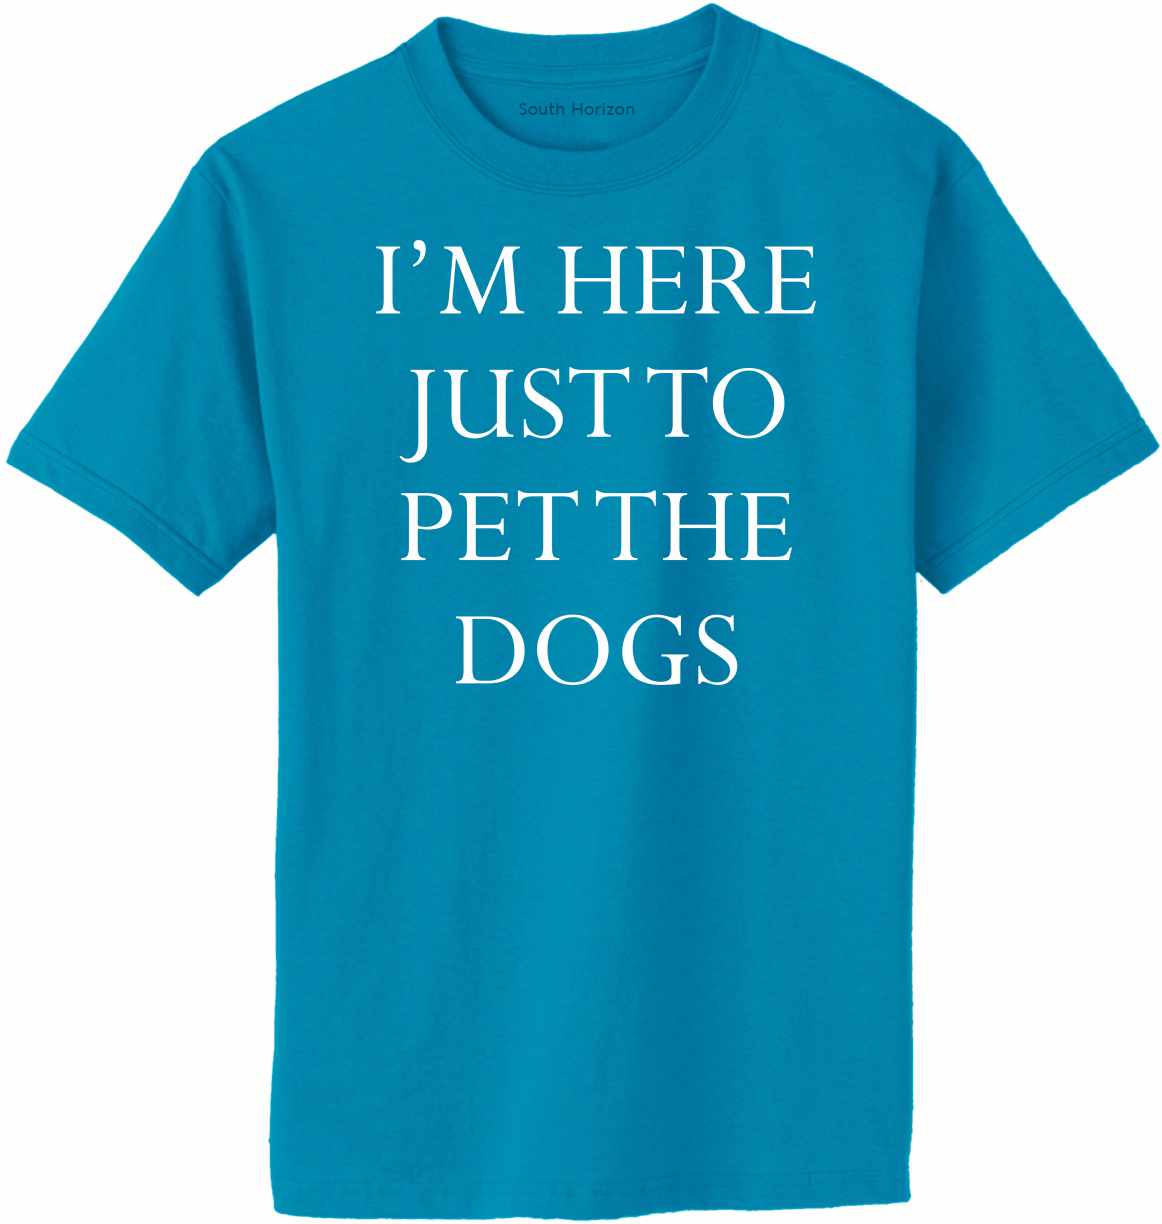 I'M HERE JUST TO PET THE DOGS Adult T-Shirt